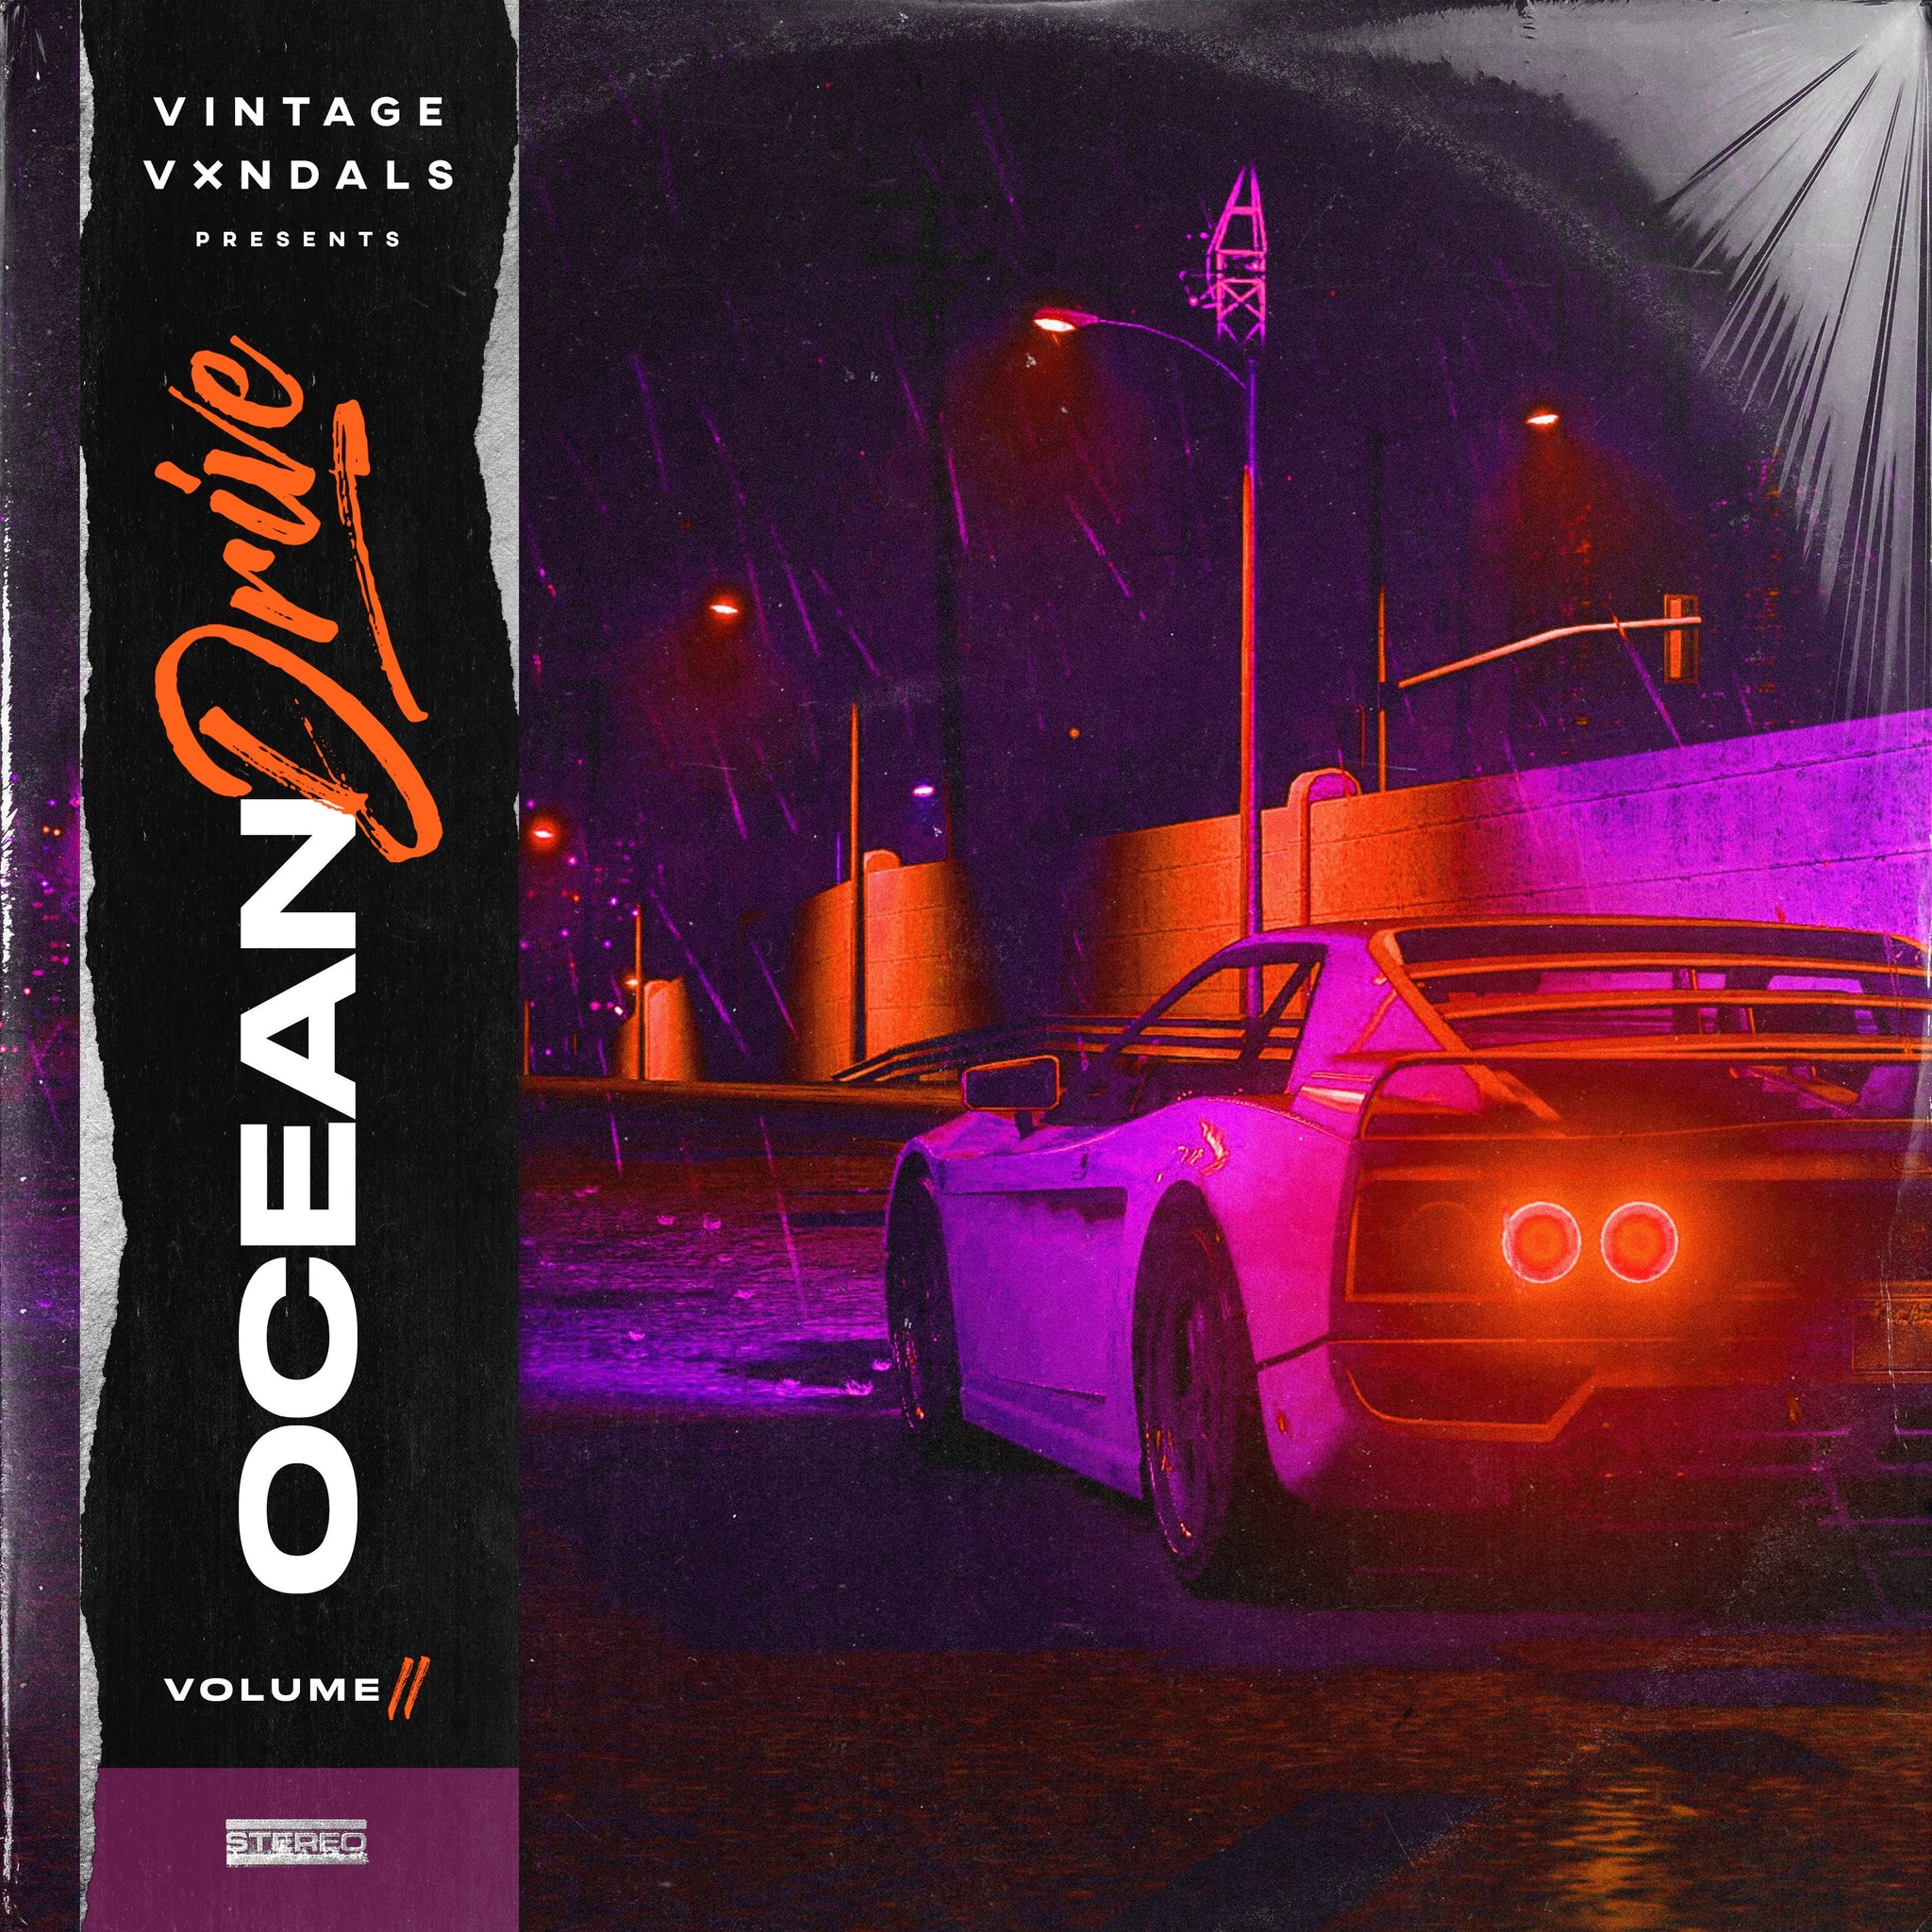 The Vintage Vxndals - Ocean Drive Volume 2 - The Sample Lab